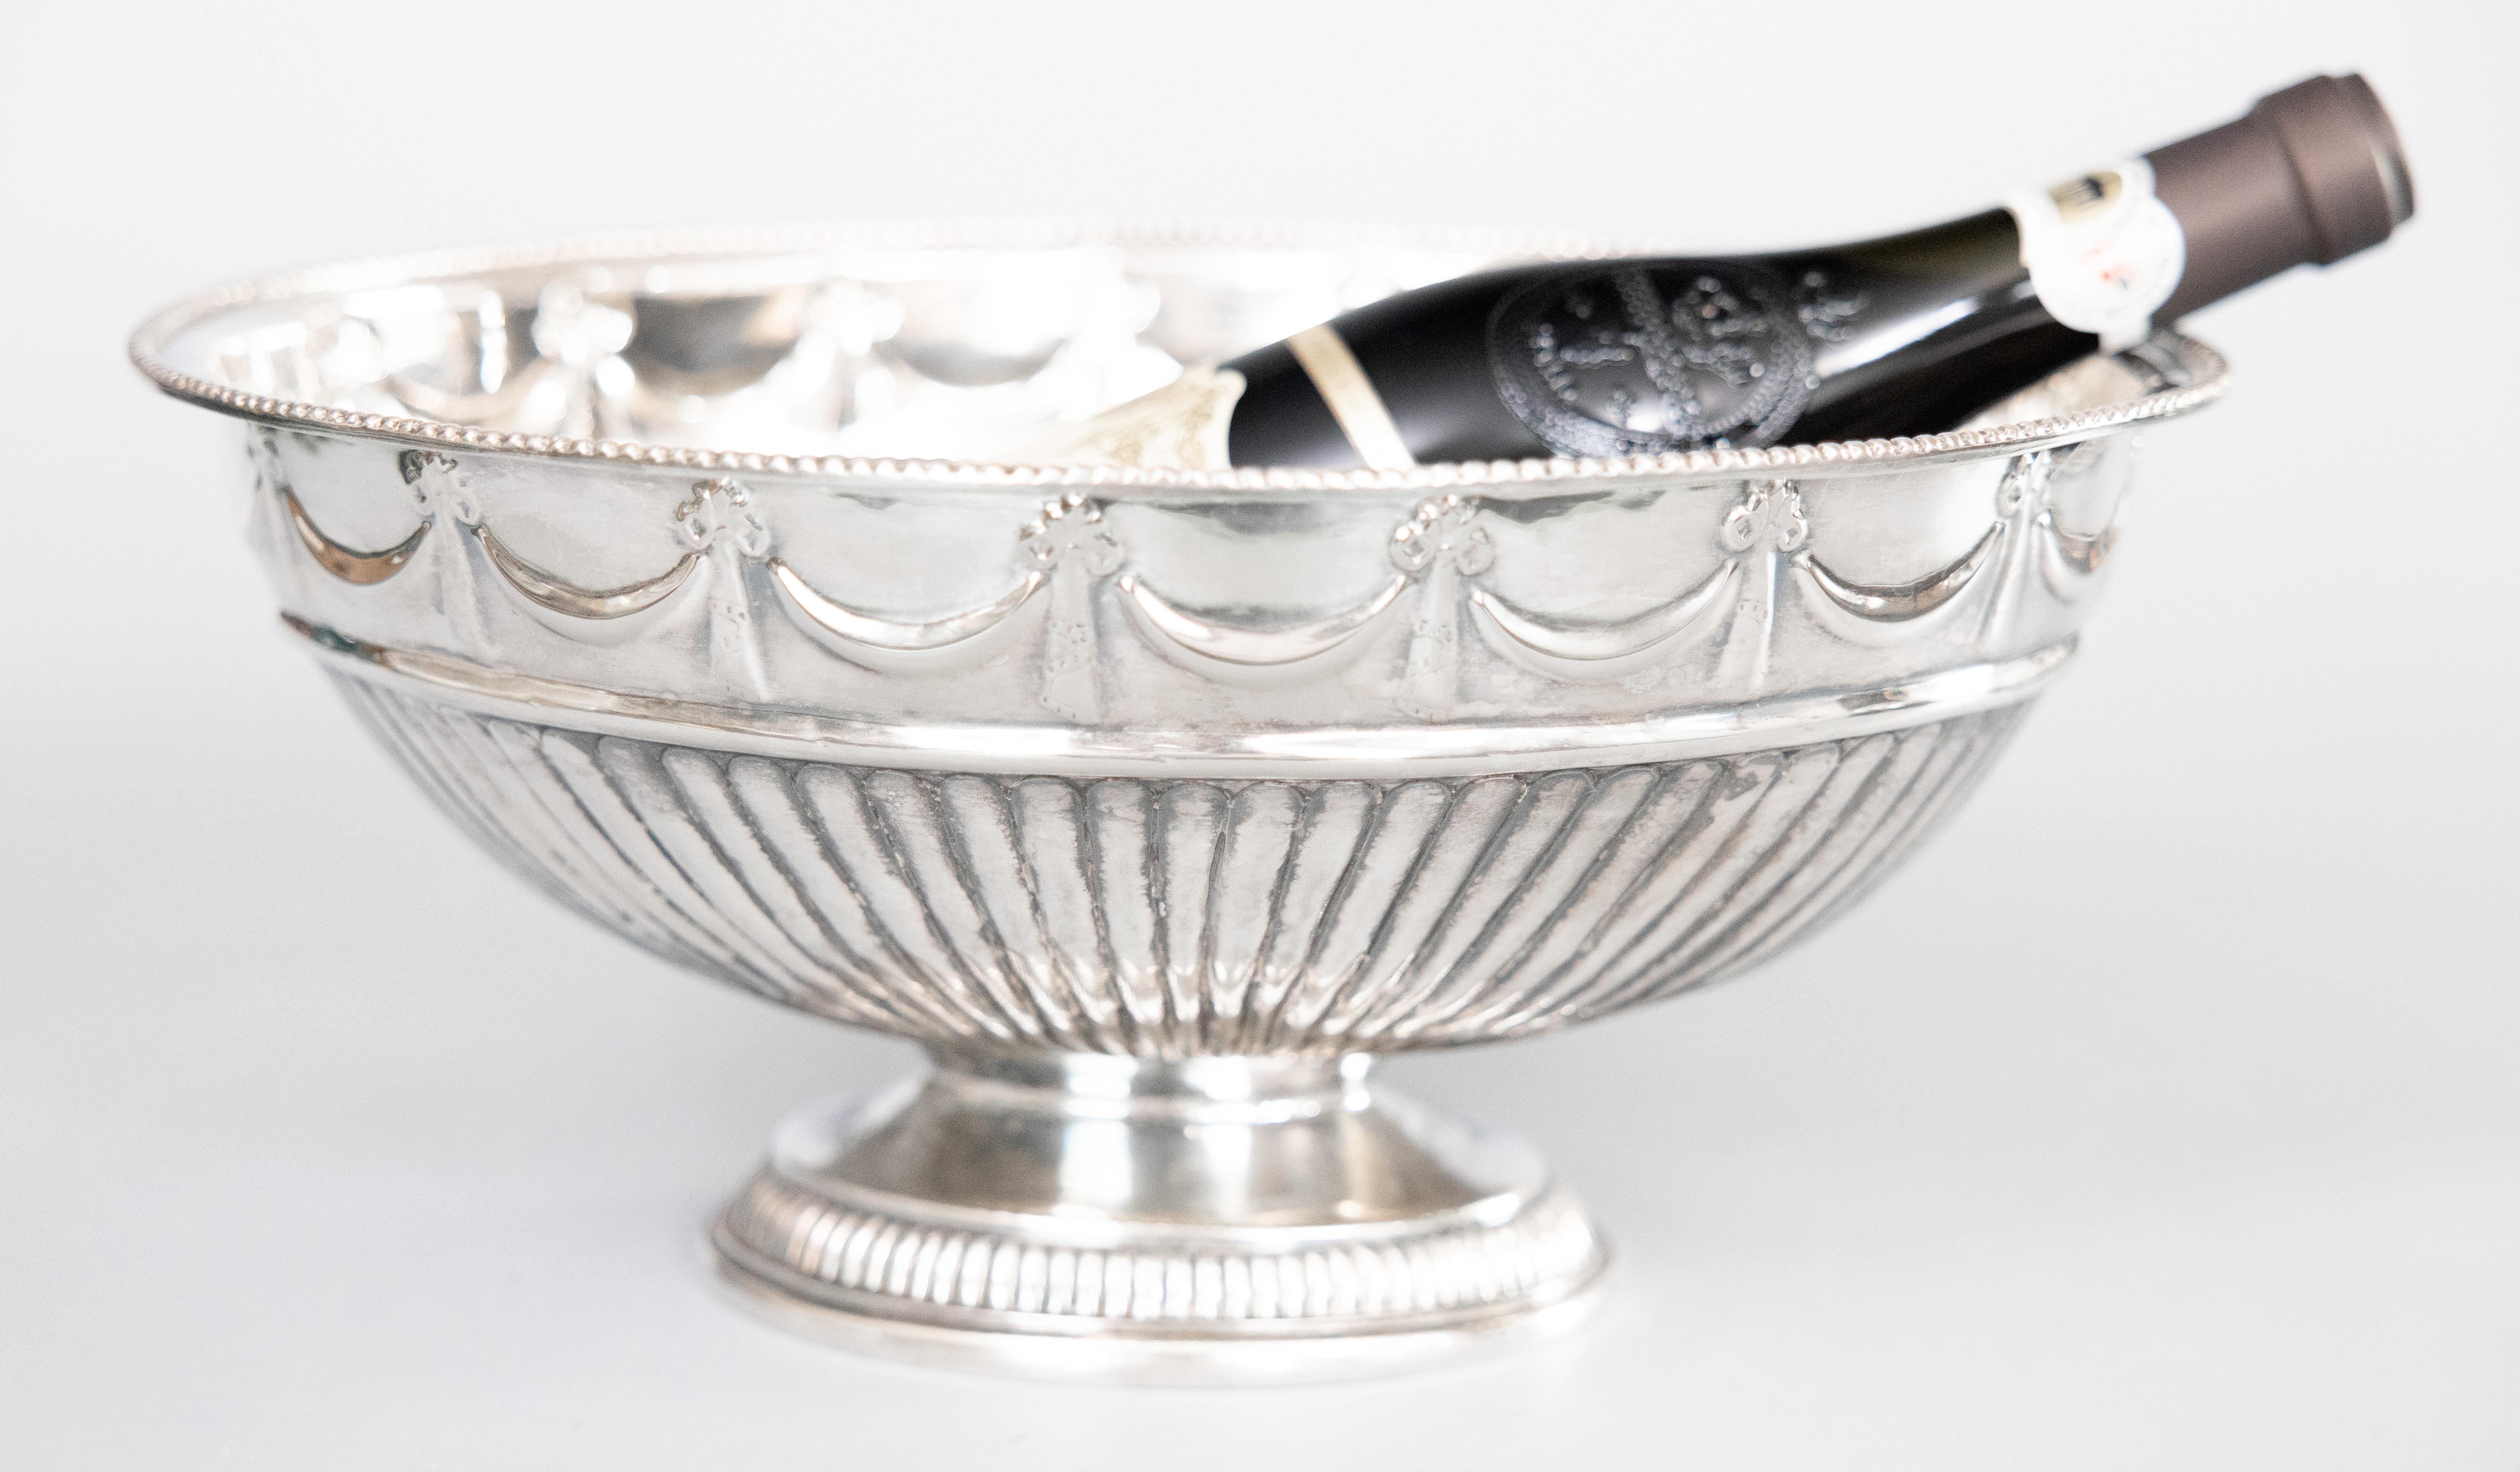 A stunning large Mid-Century English silver plate oval pedestal bowl, punch bowl, wine cooler, or champagne ice bucket. No maker's mark. This gorgeous bowl is decorated with draped bows and ribbons, gadrooned details, and a beaded rim in a lovely